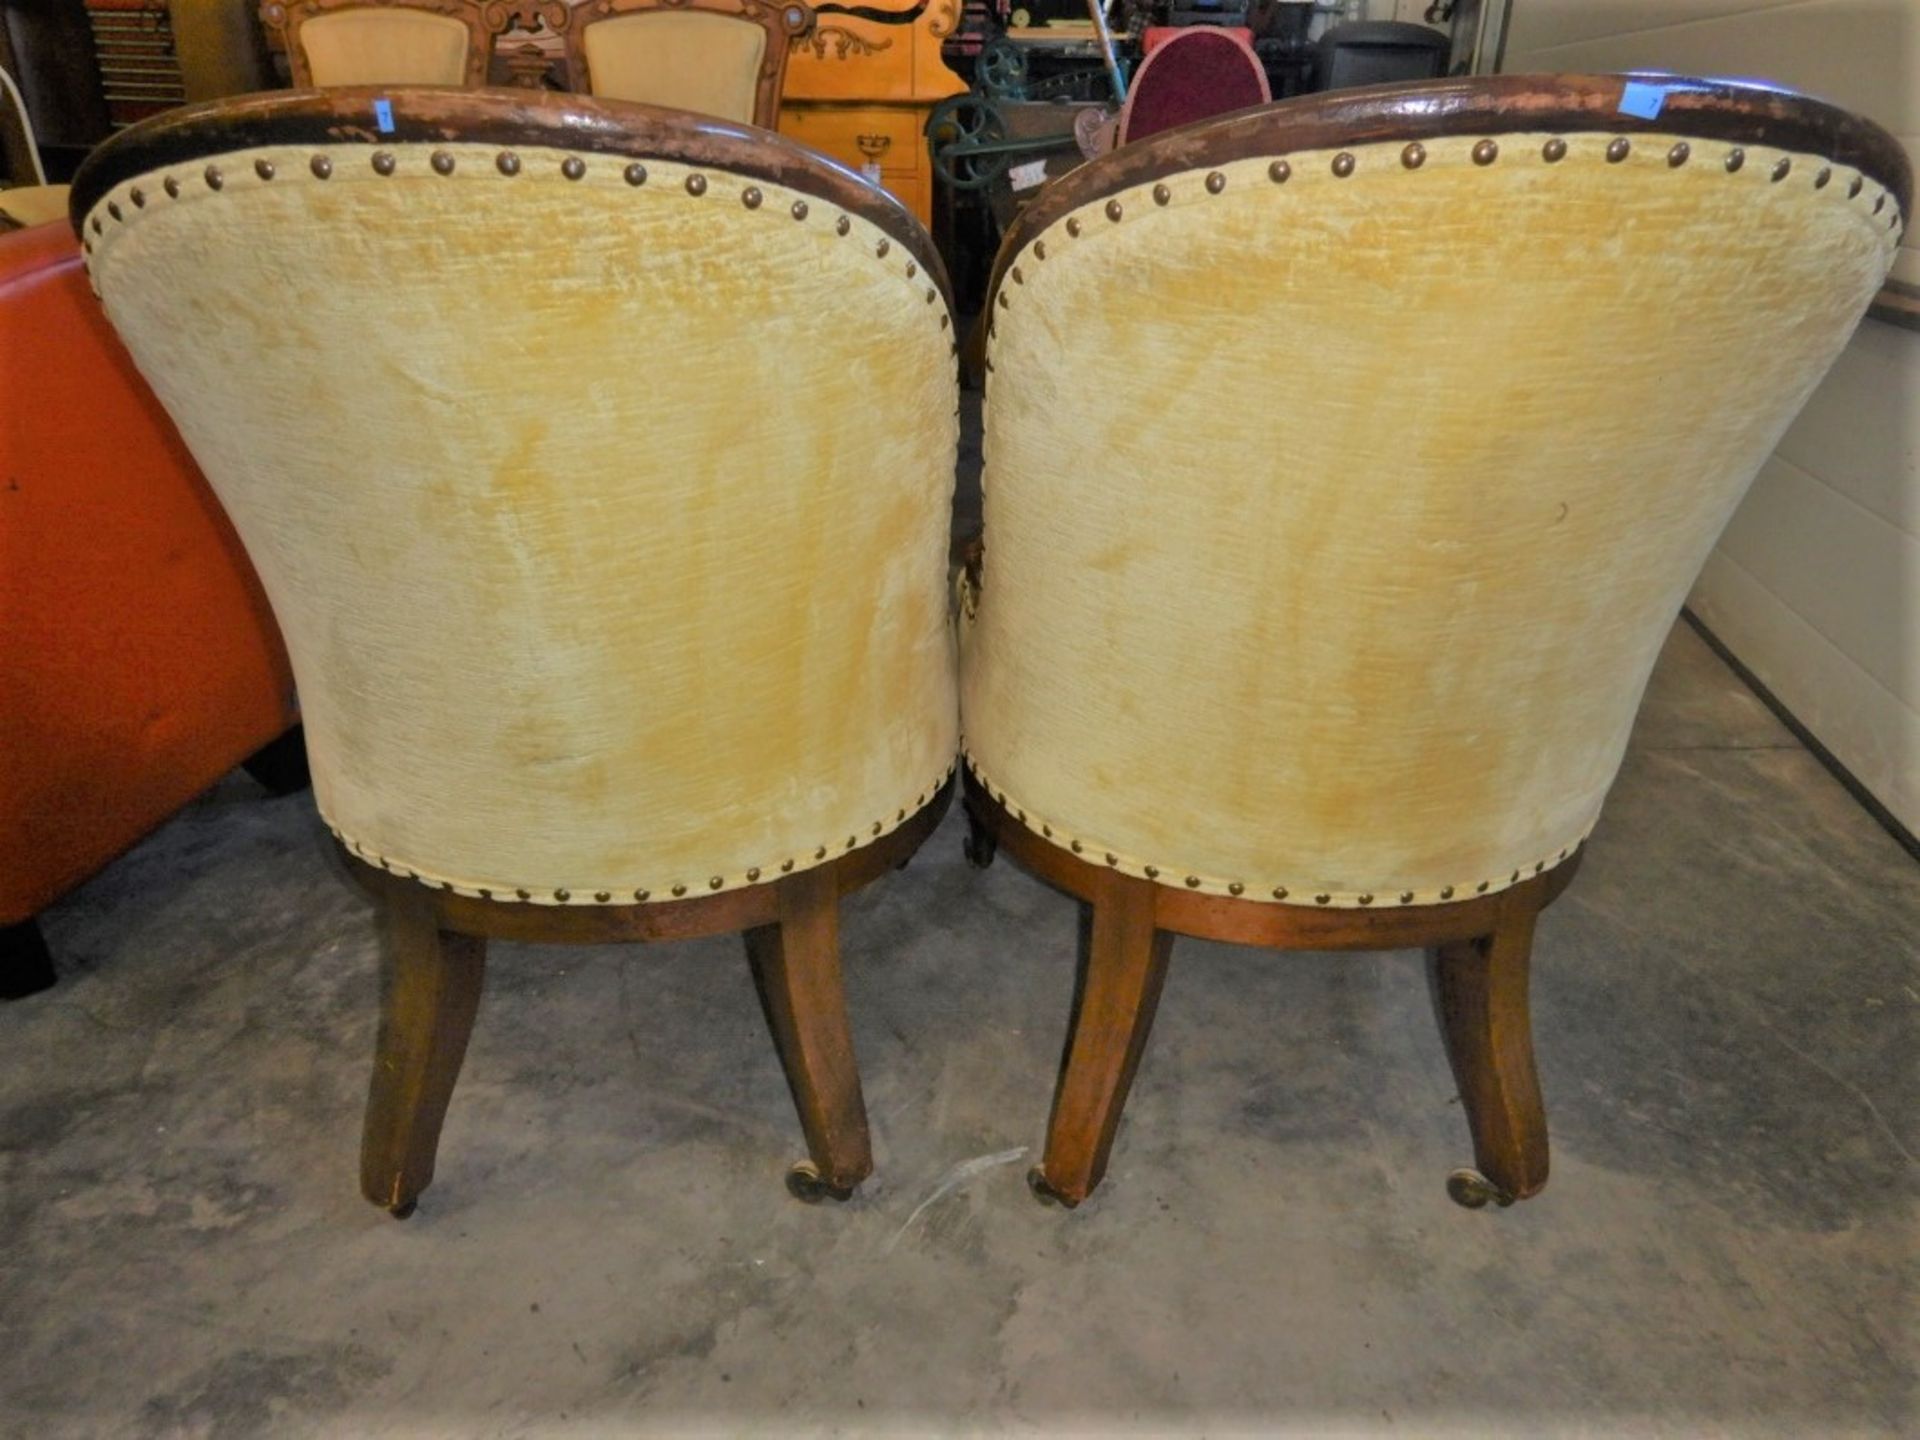 ANTIQUE PARLOR CHAIRS (2) - YELLOW - Image 11 of 13